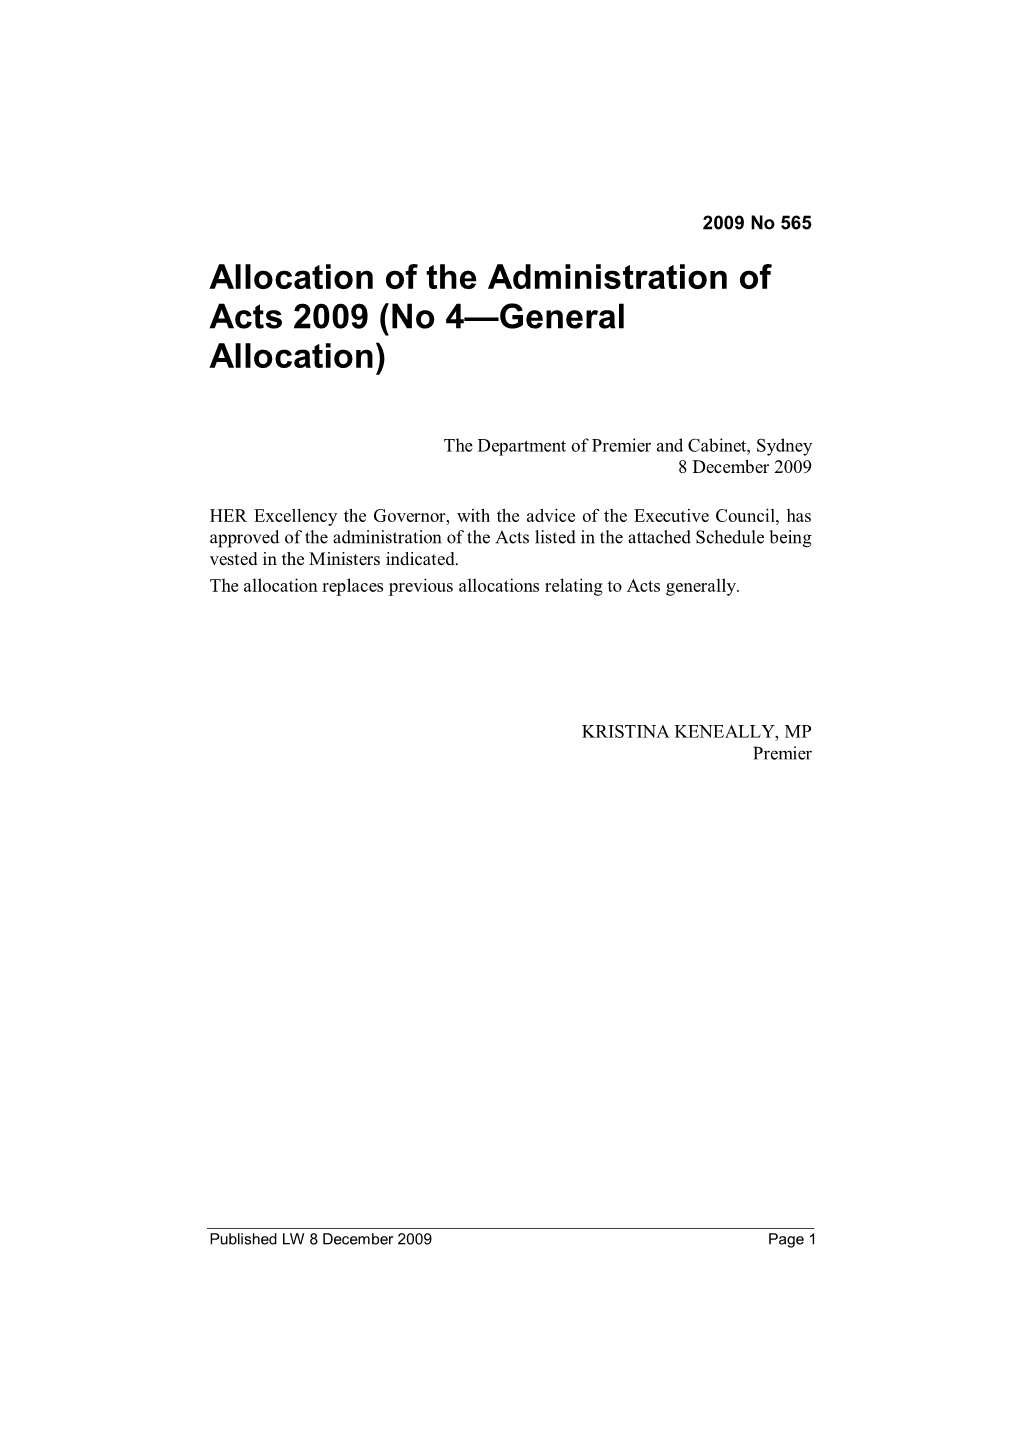 Allocation of the Administration of Acts 2009 (No 4—General Allocation)